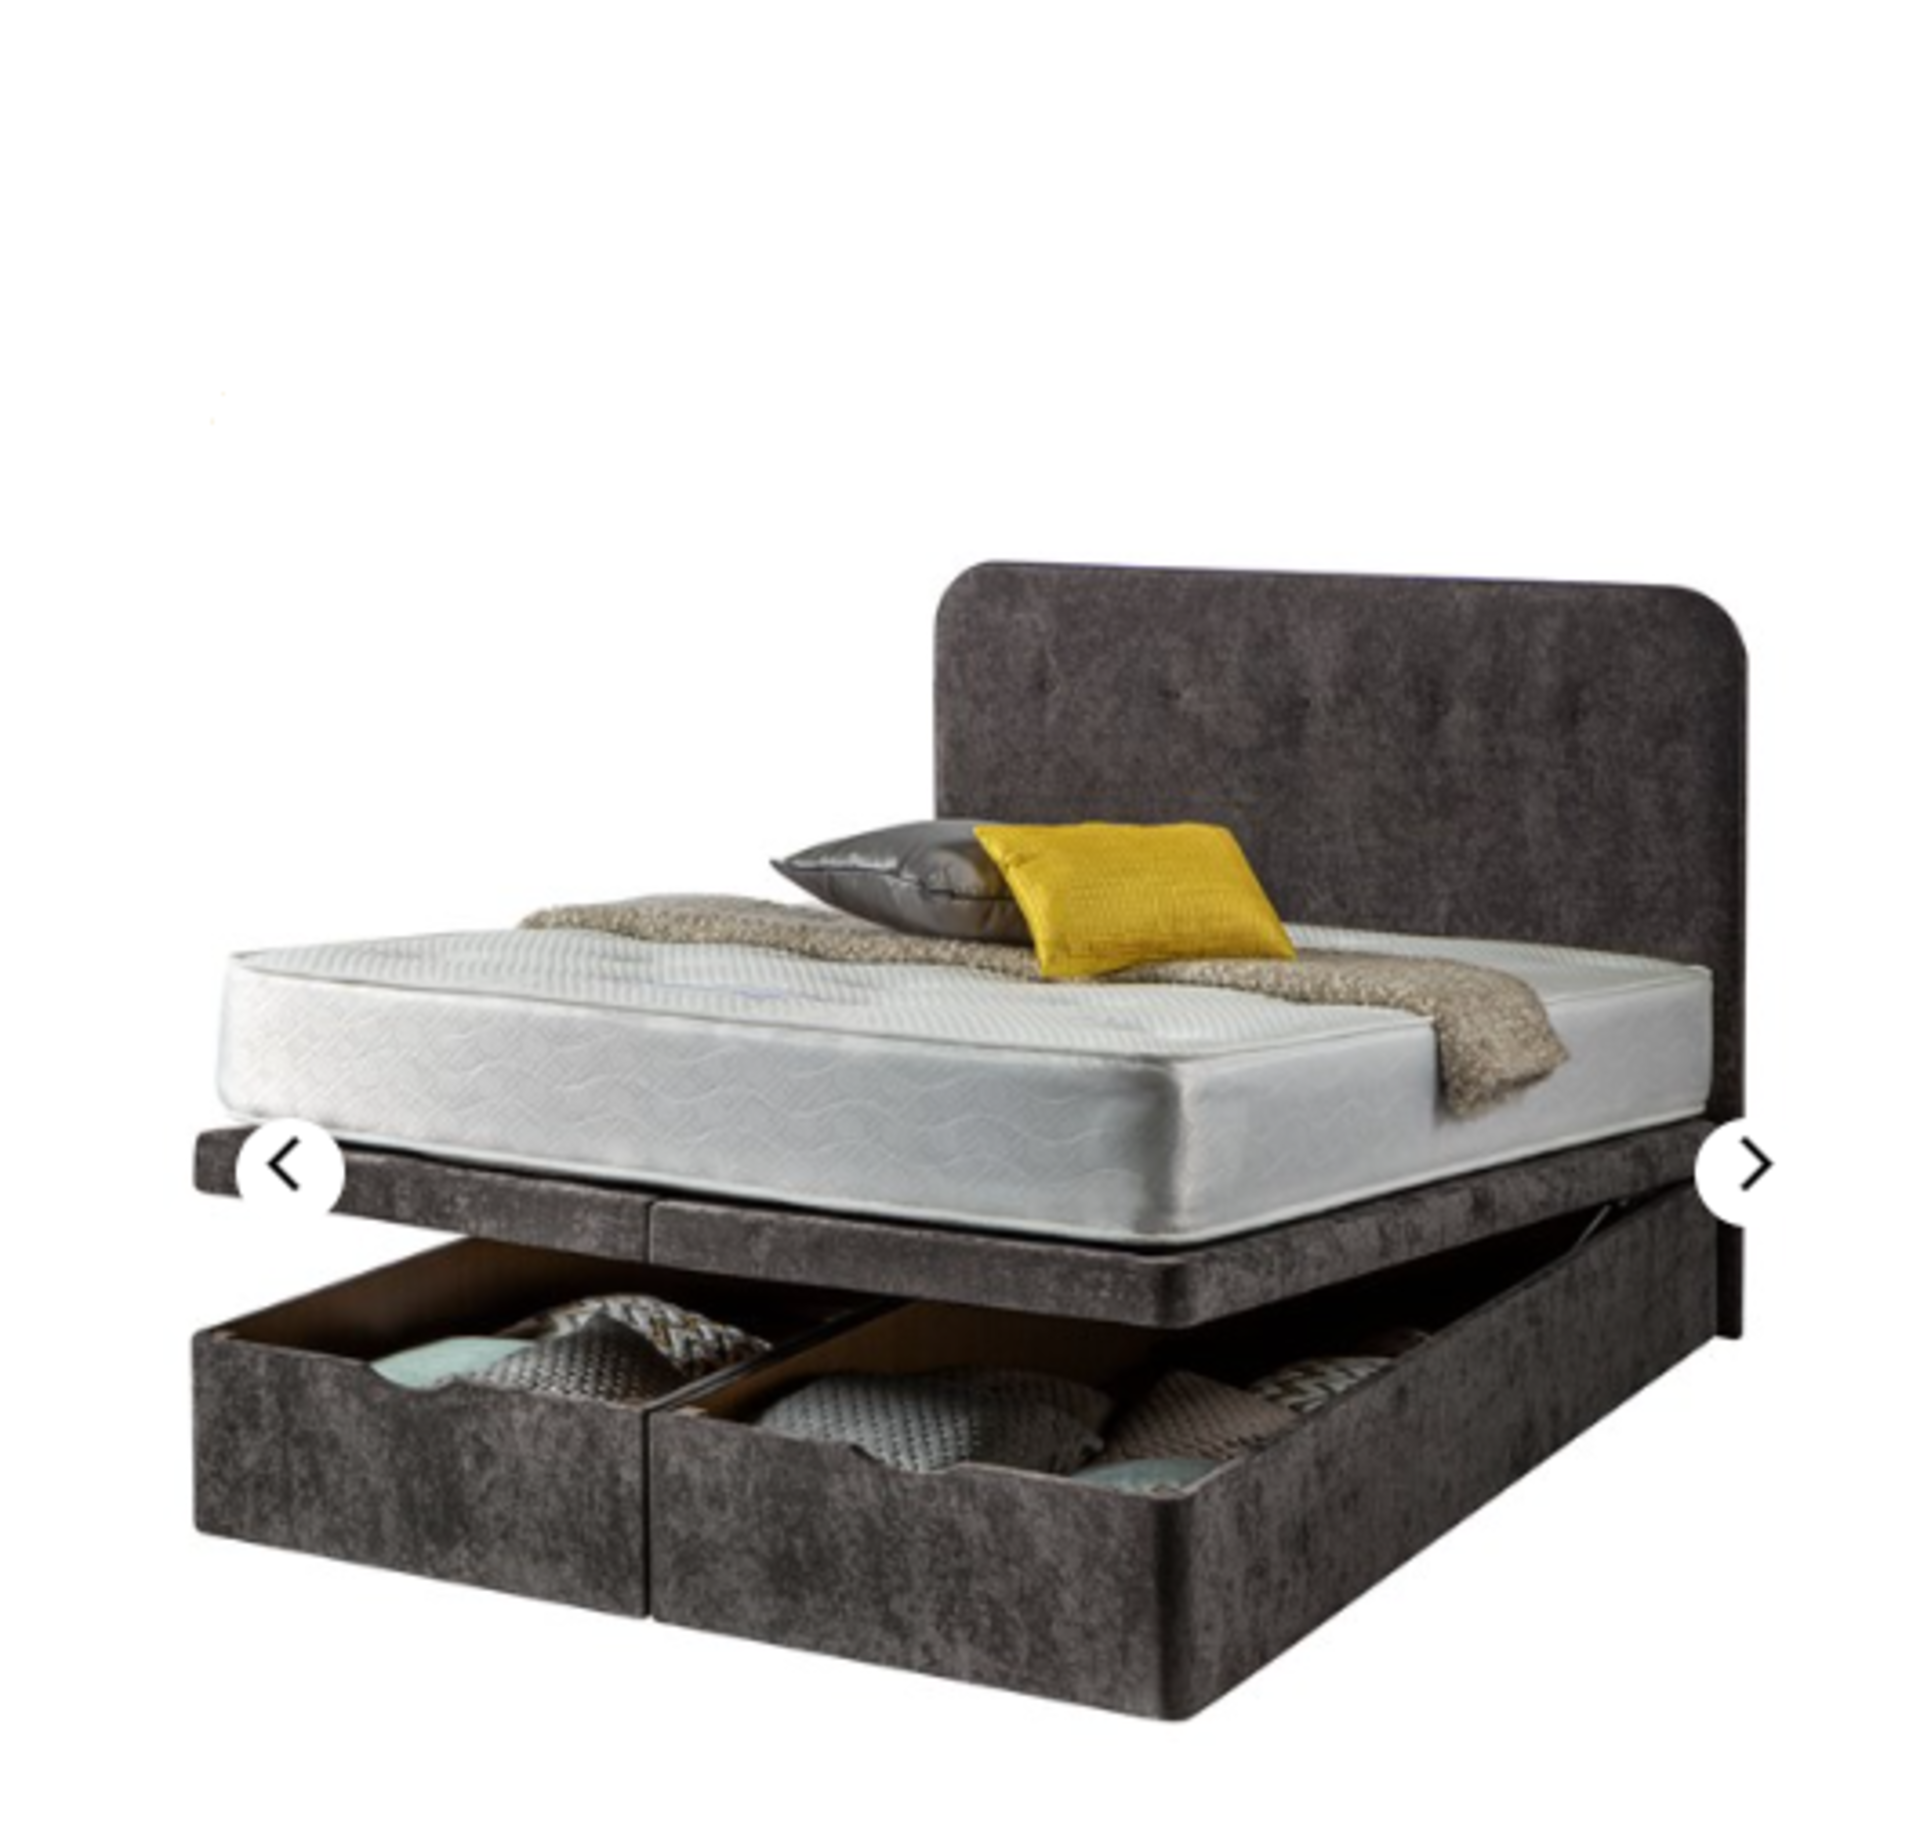 | 1X |SLEEPRIGHT GENOA 5FT DIVAN BED BASE 2-DRAWER KING SIZE SLATE | 2 PARTS | LOOKS TO BE IN GOOD